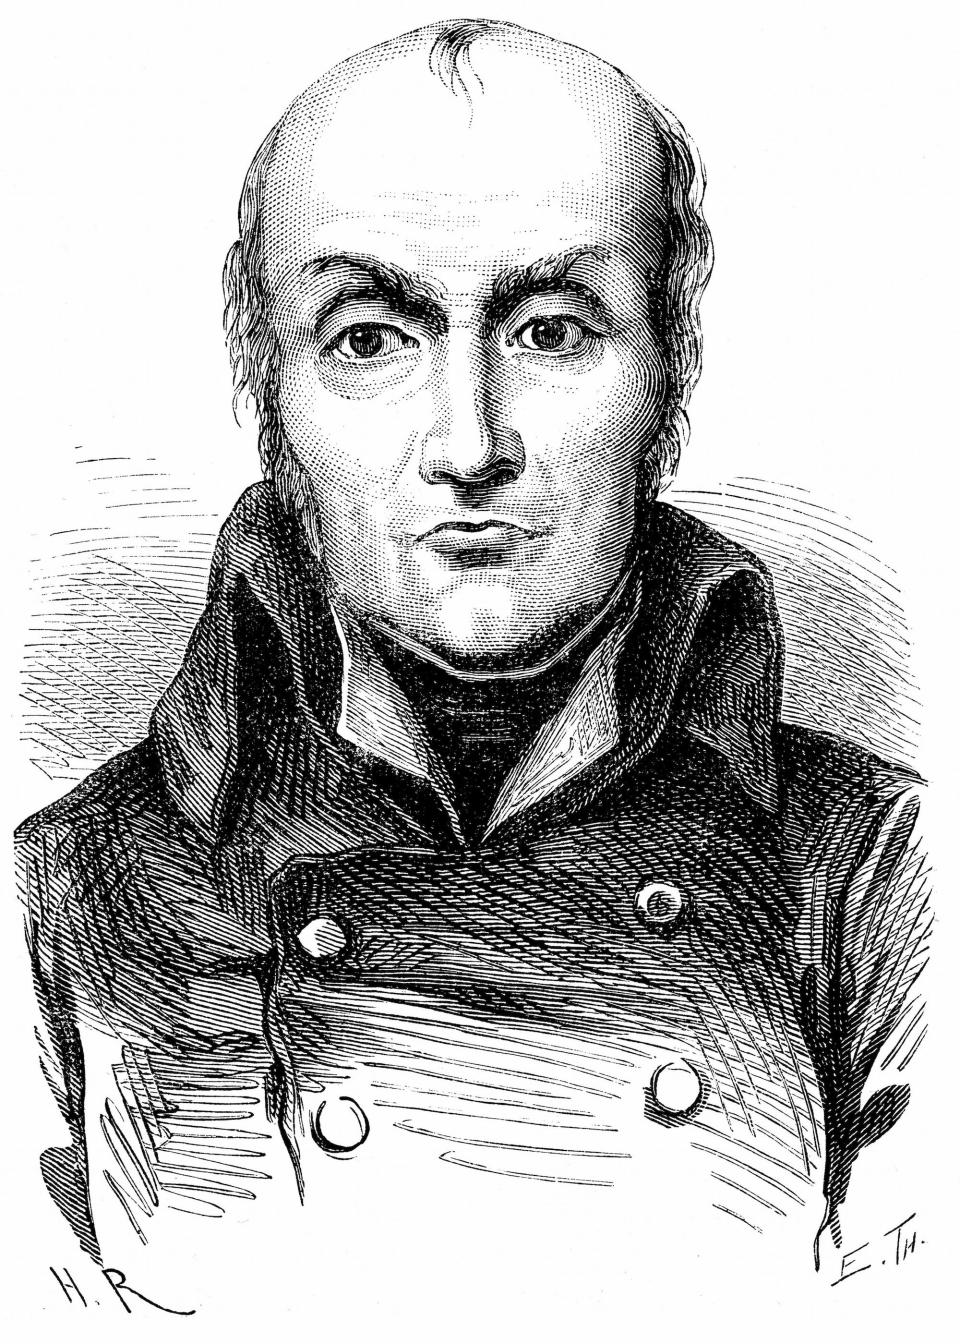 An engraving of Nicolas Appert from the shoulders up wearing a high-collared coat with buttons